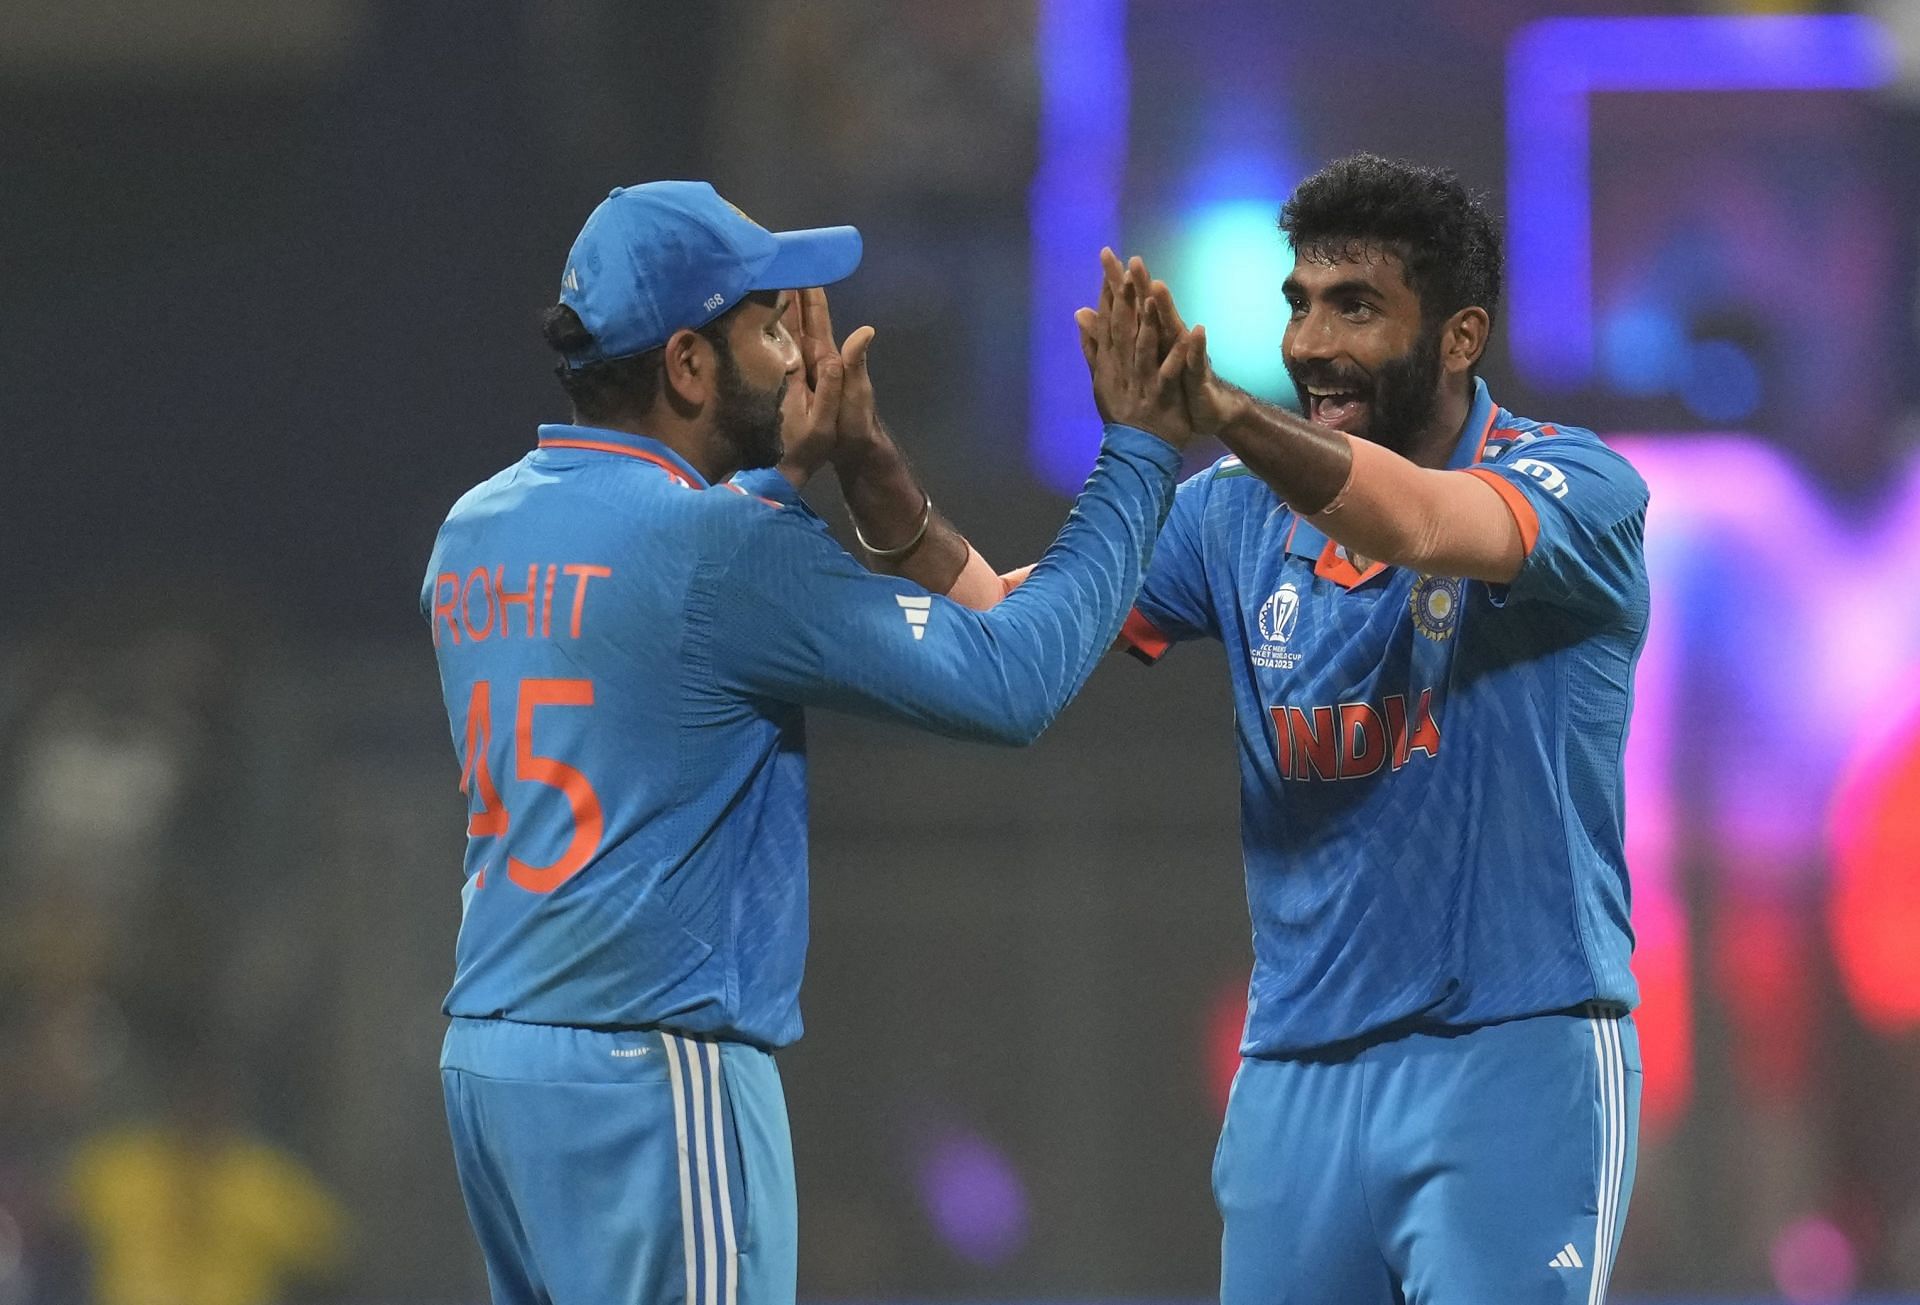 India will be hoping for early blows from Jasprit Bumrah. (Pic: AP)